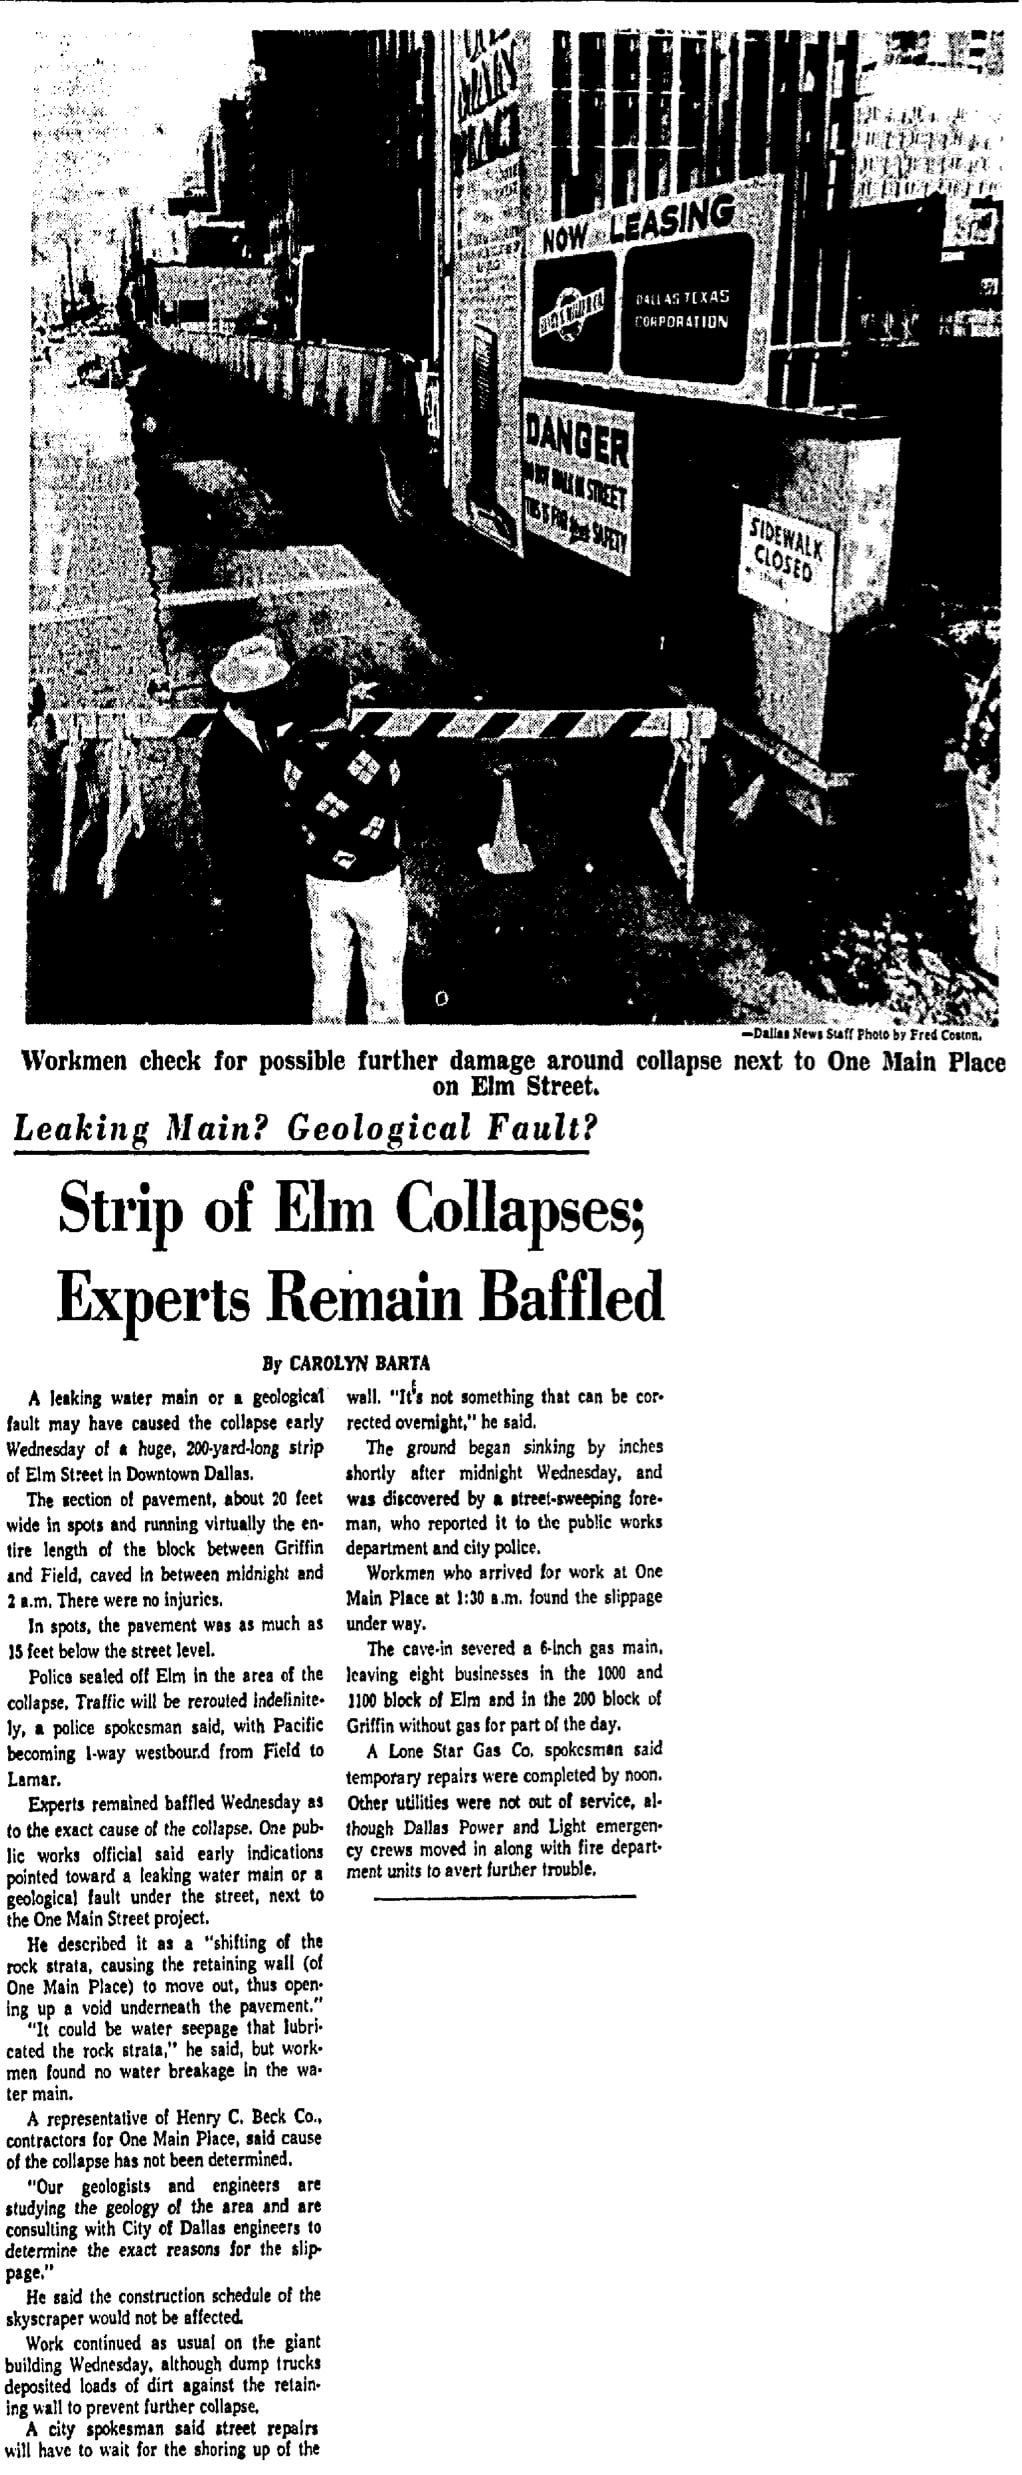 The great Elm Street cave-in of 1967 made headlines in Dallas.